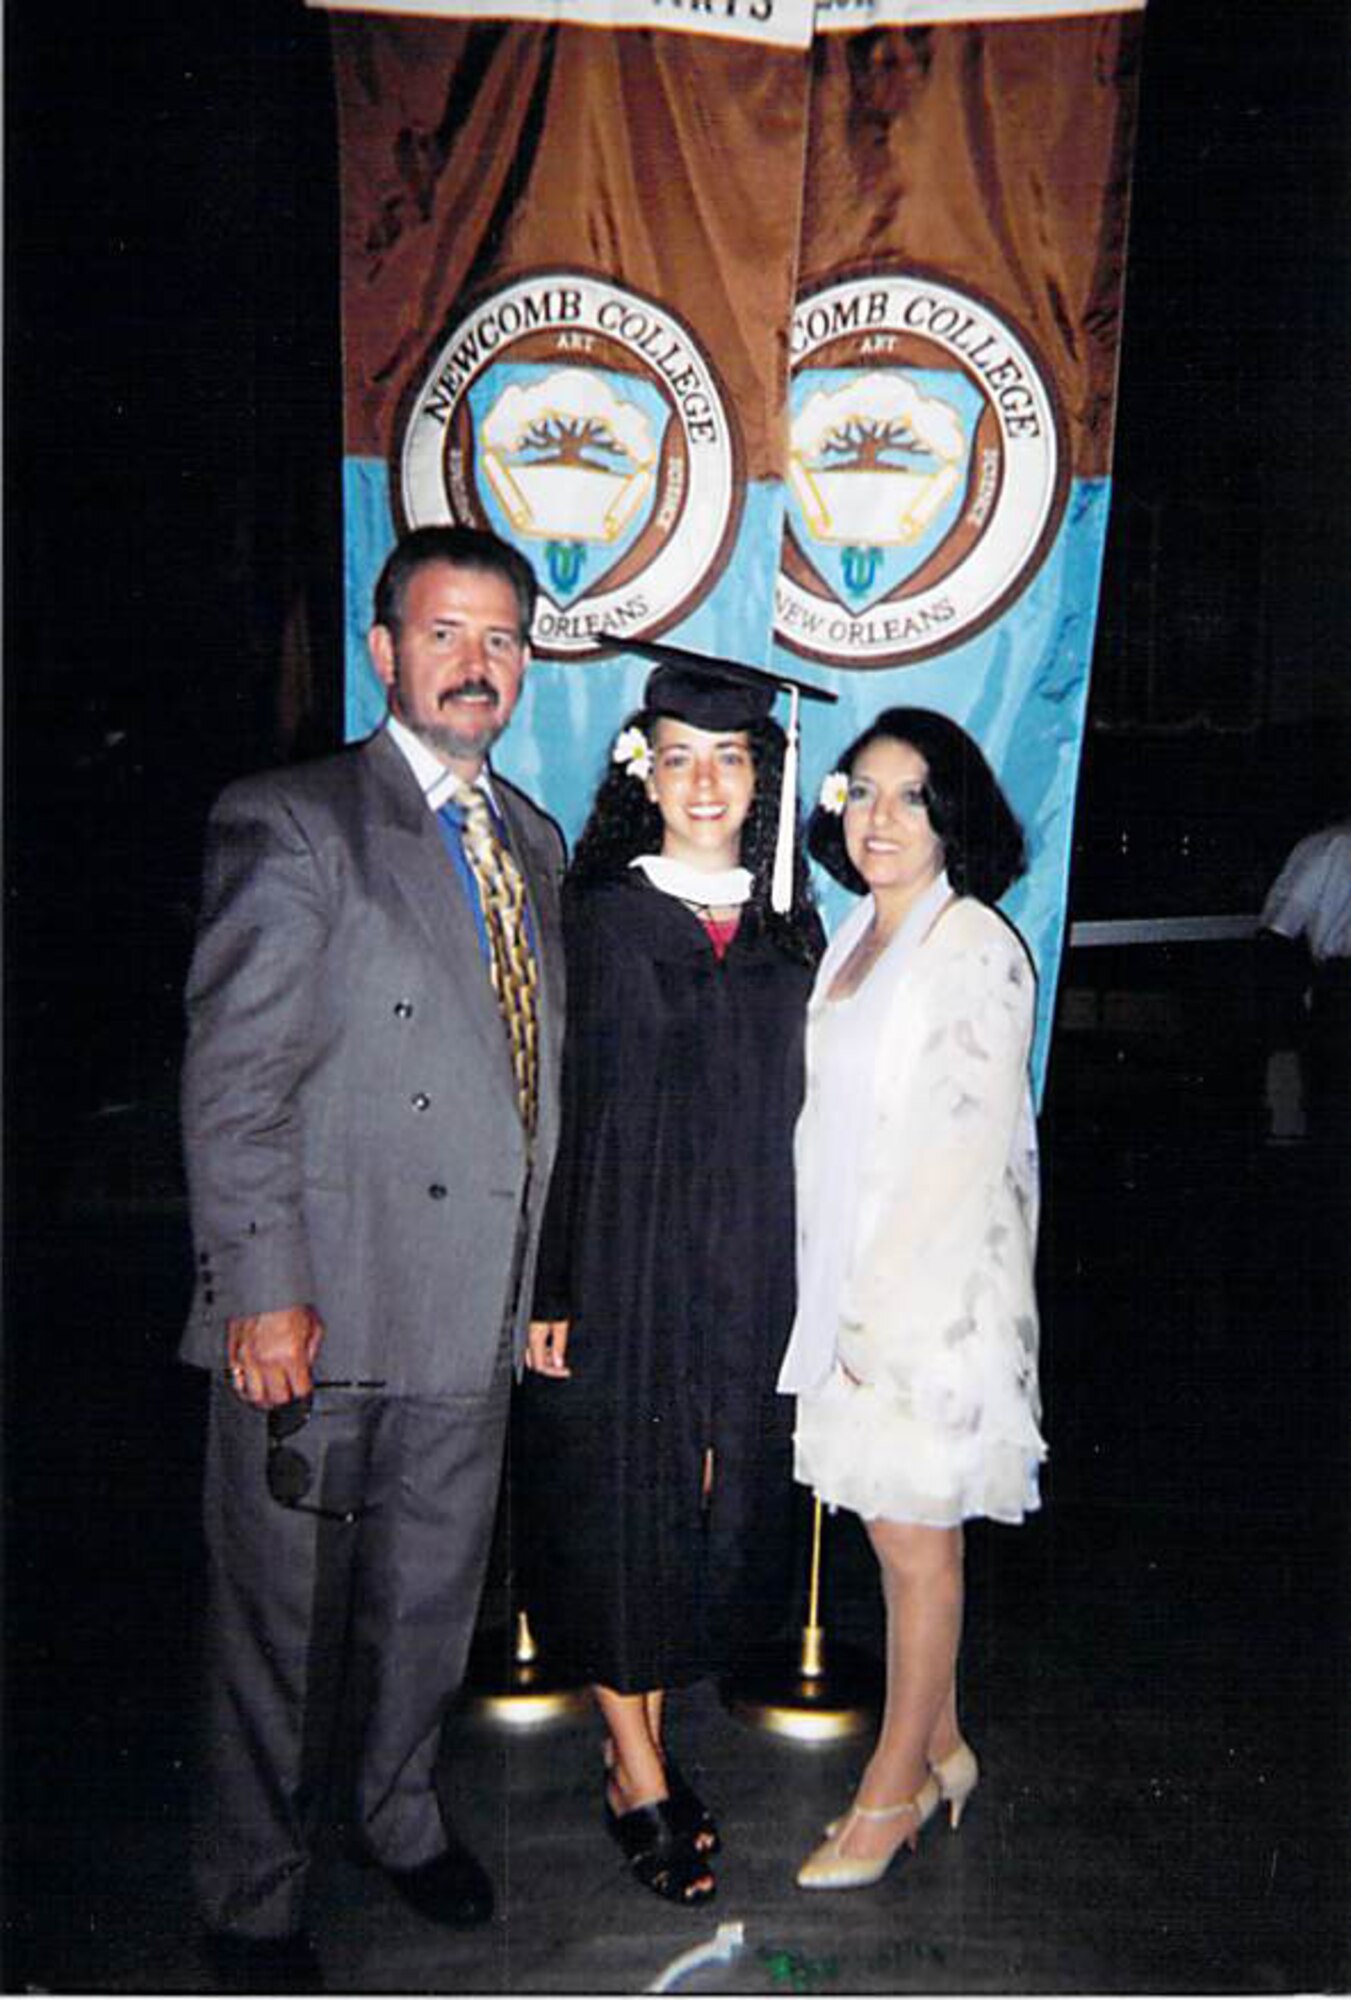 Maj. Liliana Henriquez (center) stands with her father, Roberto Henriquez, and mother, Liliana Henriquez, after graduating from Newcomb College in New Orleans. Maj. Henriquez, Oceana Dam Neck Annex Joint Targeting School joint staff J7 instructor, graduated in 1998. (Courtesy photo)